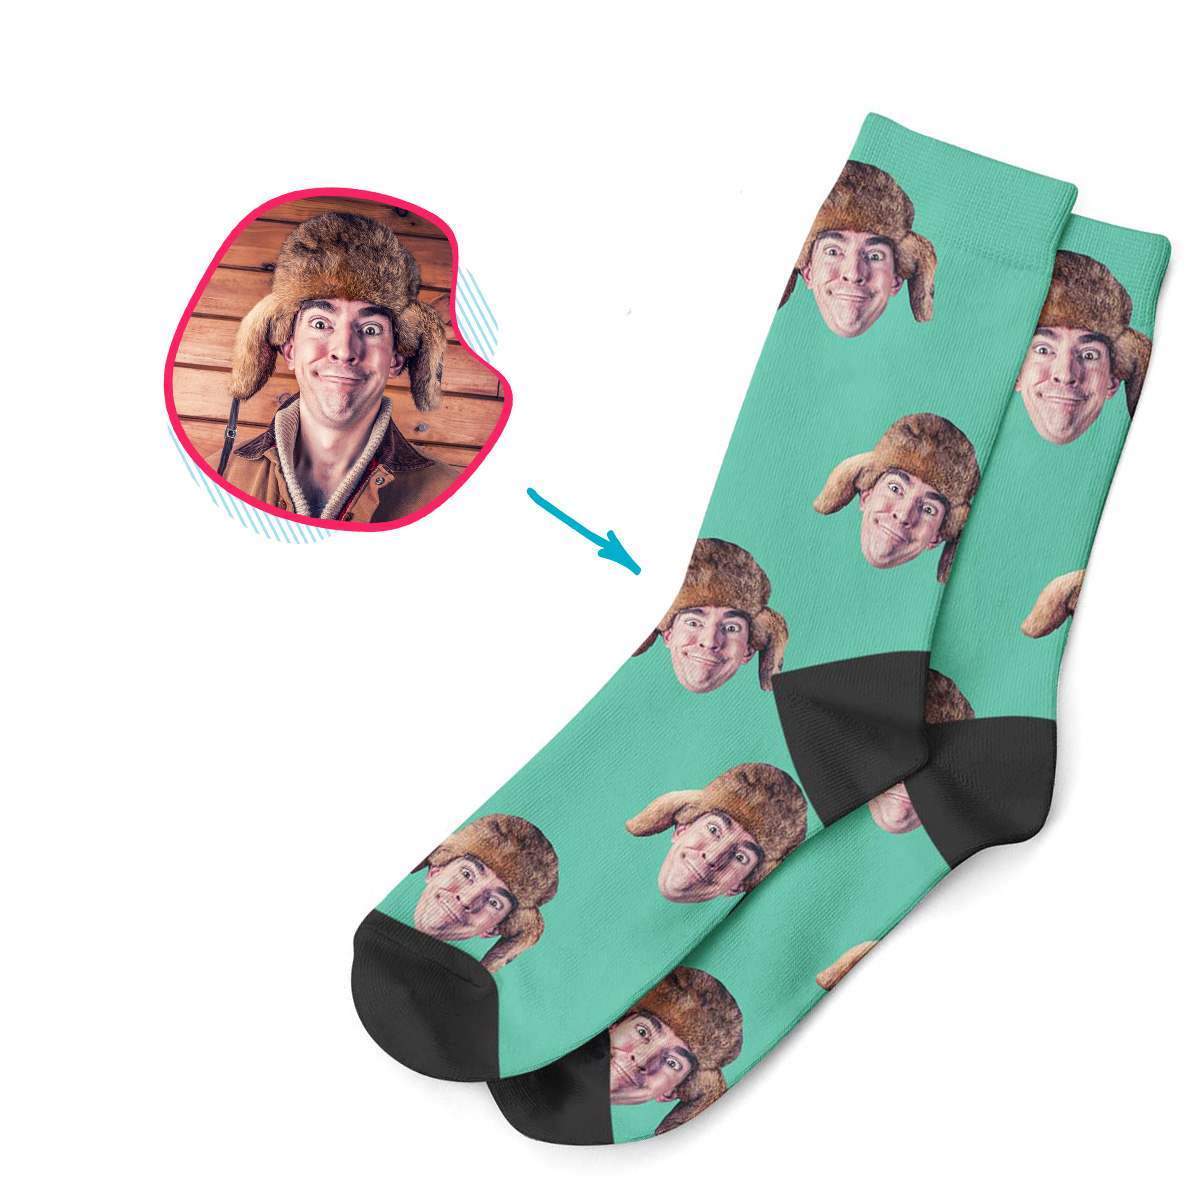 mint Blank design socks personalized with photo of face printed on them